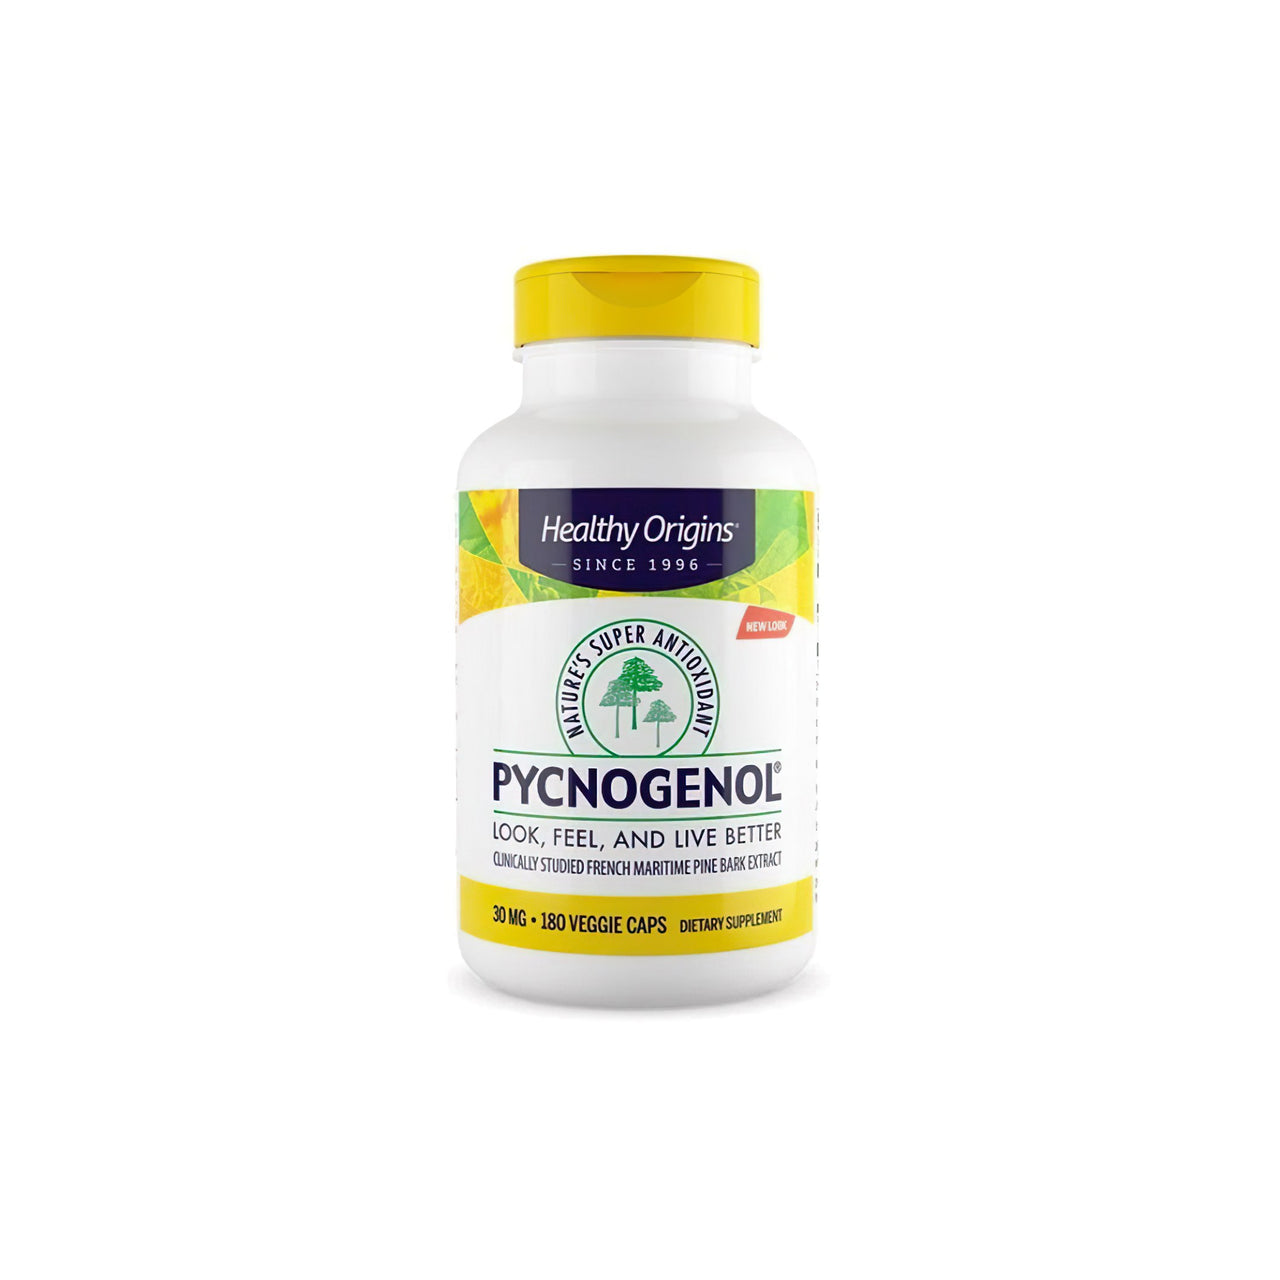 A bottle of Healthy Origins' antioxidant dietary supplement, Pycnogenol 30 mg 180 vege capsules, for cardiovascular health.